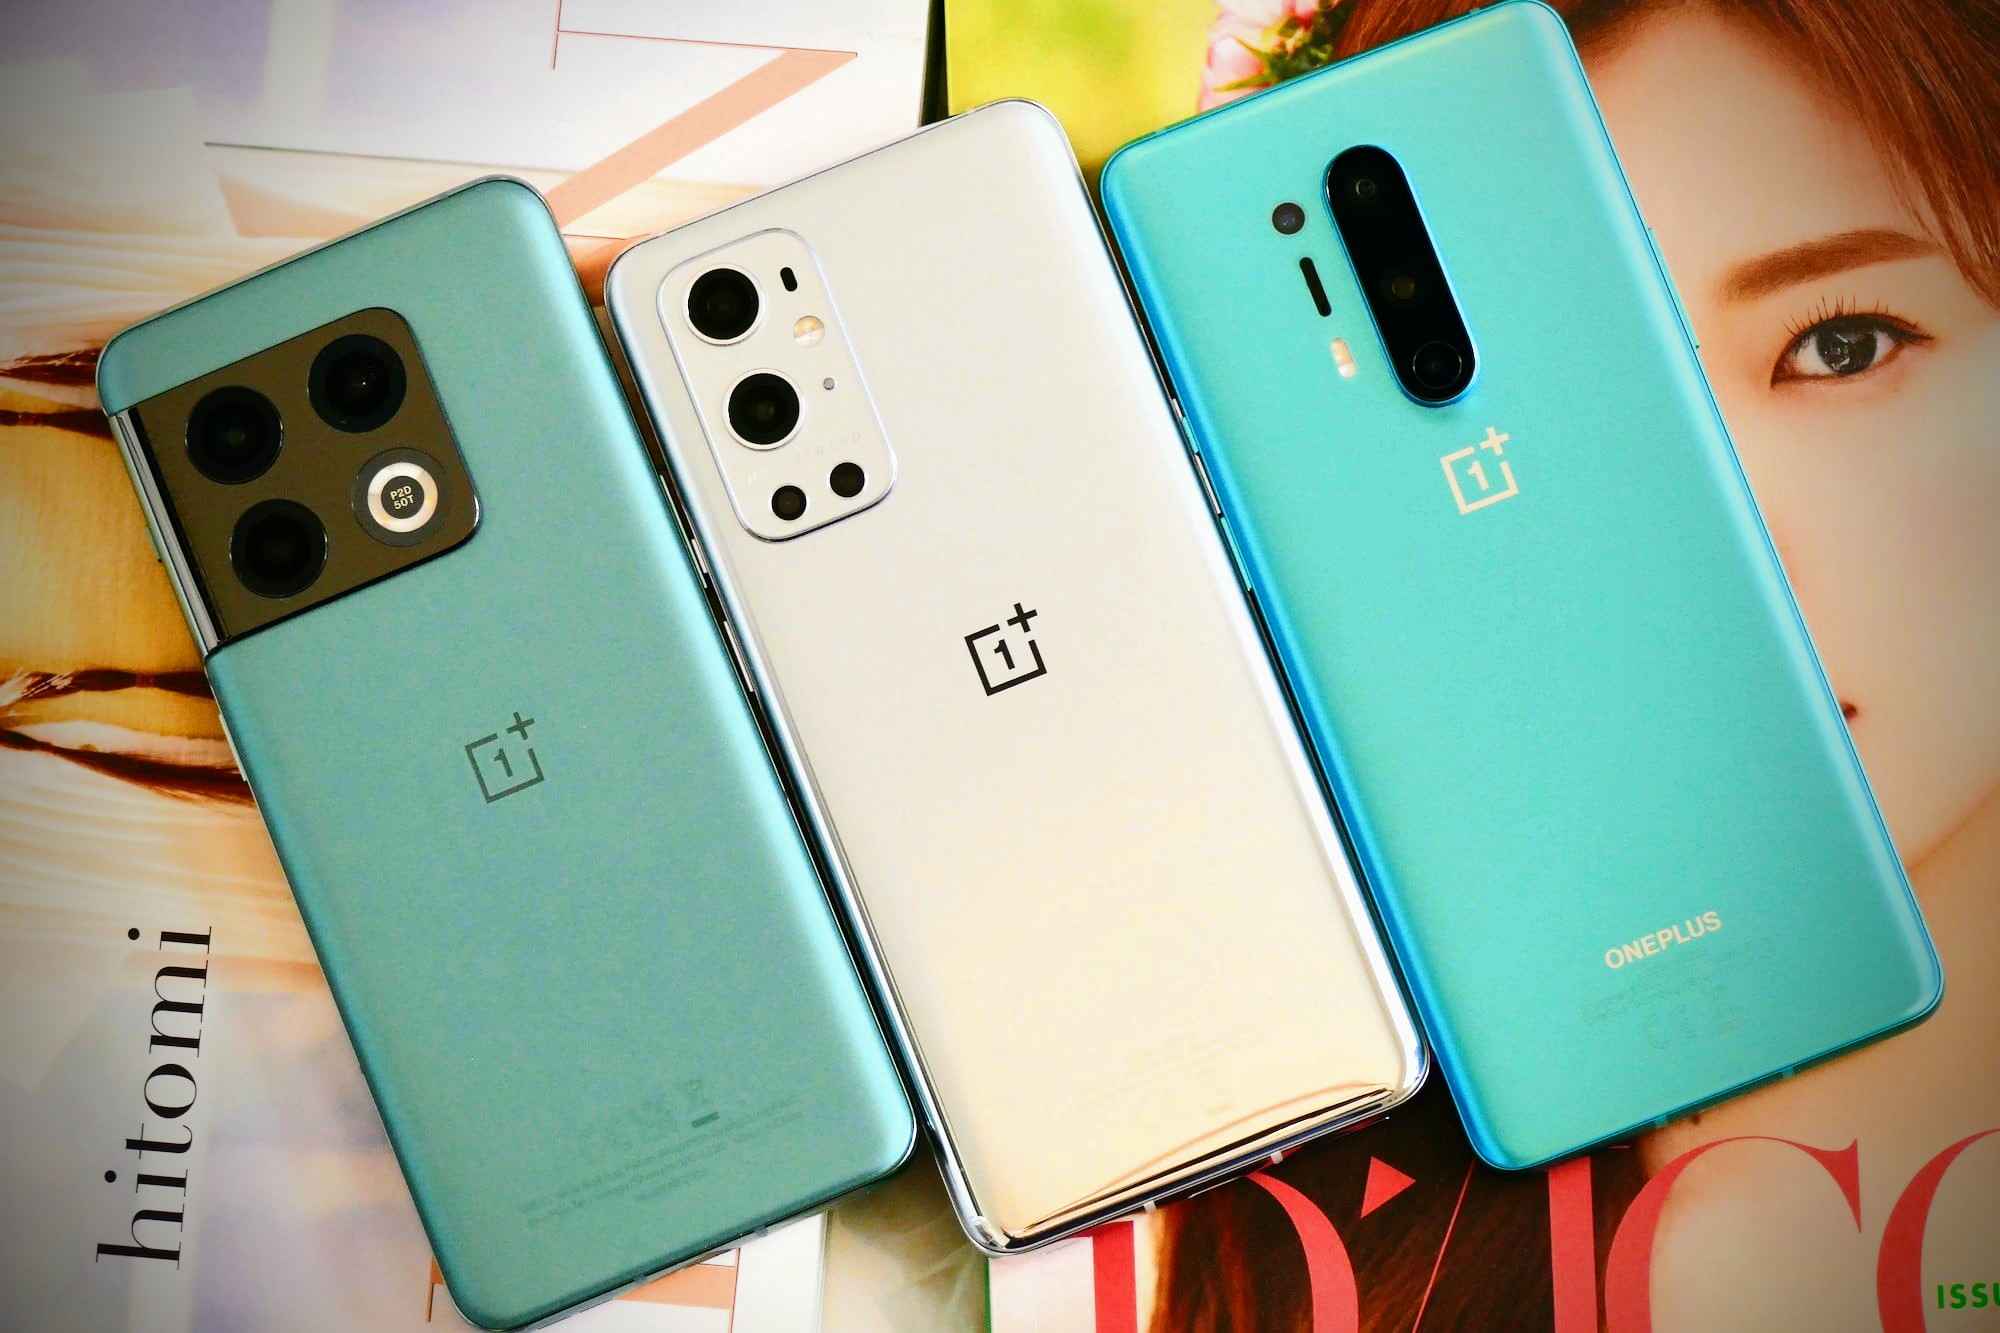 which Oneplus Phones we should avoid Buying this 2022- Check out the Better alternatives